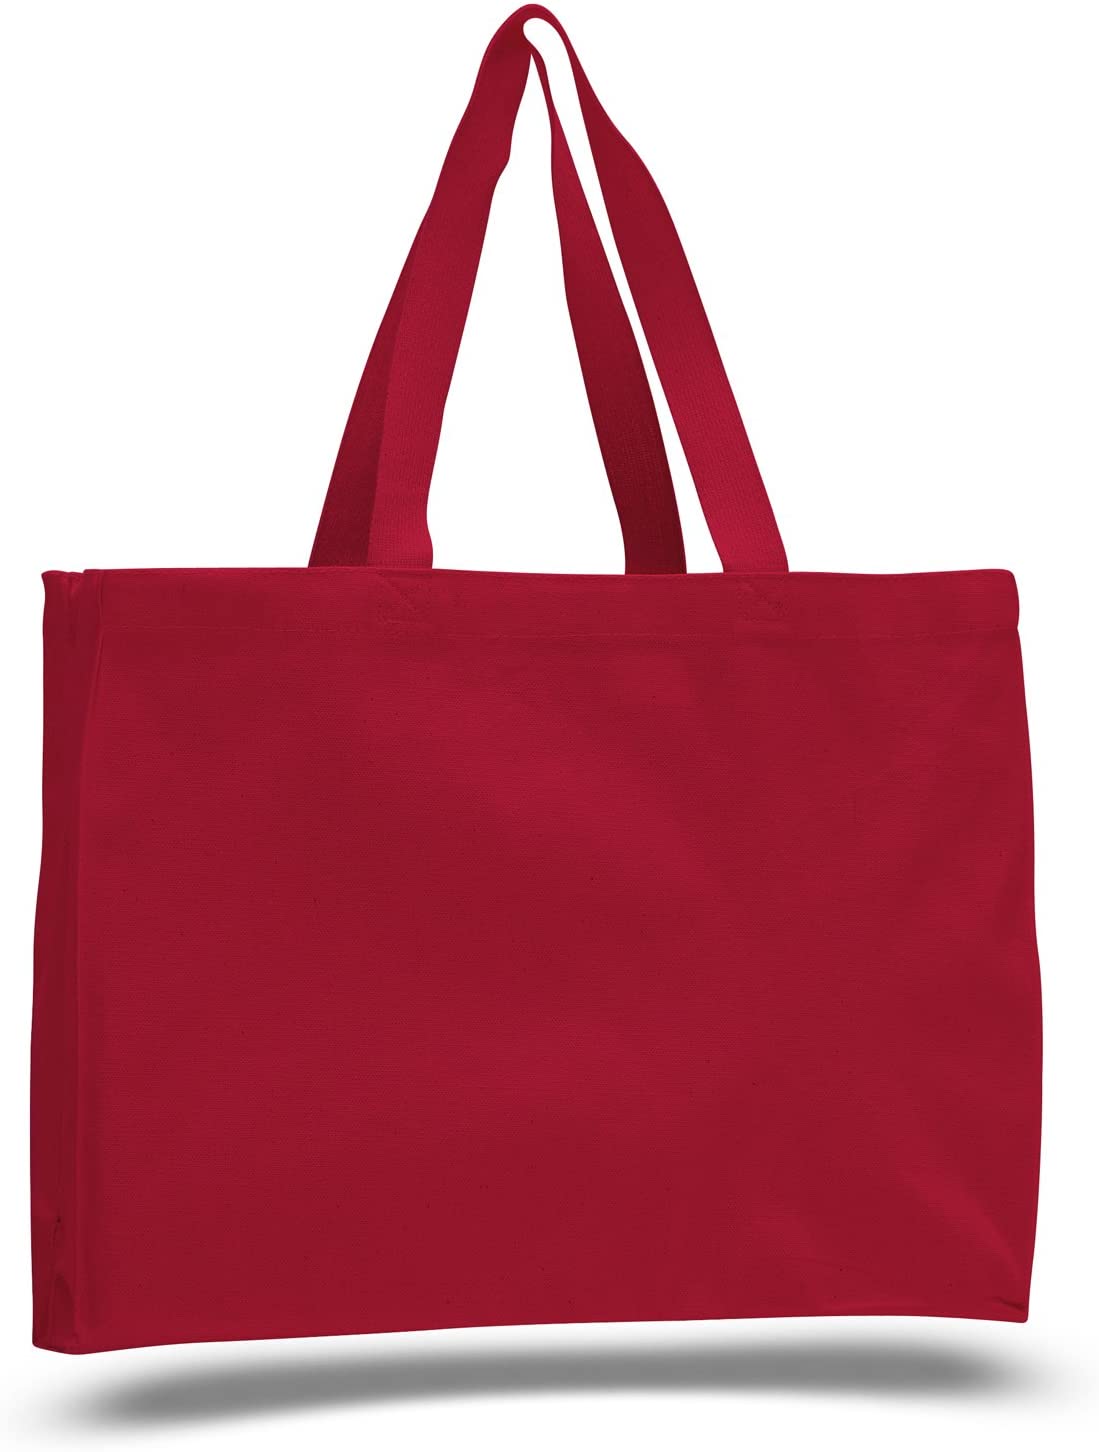 cheap Bulk Heavy Canvas Shopping Tote Bags, Reusable Grocery Shopper Totes Wholesale red